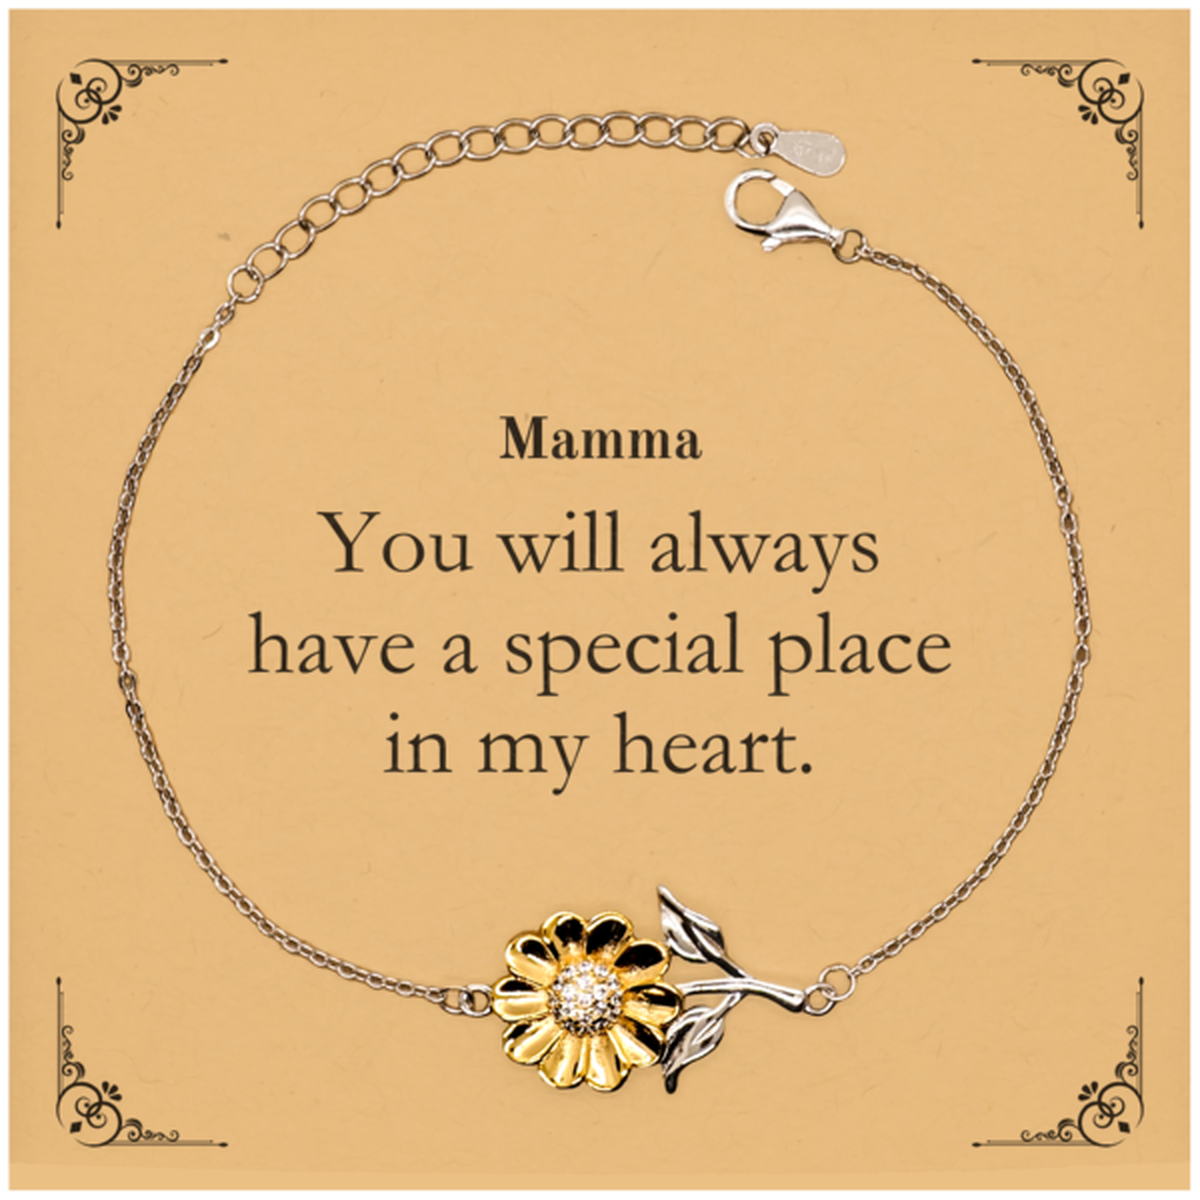 Special Mamma Sunflower Bracelet - Engraved Gift for Her Birthday, Mothers Day, Christmas - You will have a place in my heart always, Mamma - Inspirational Jewelry for Confidence and Hope